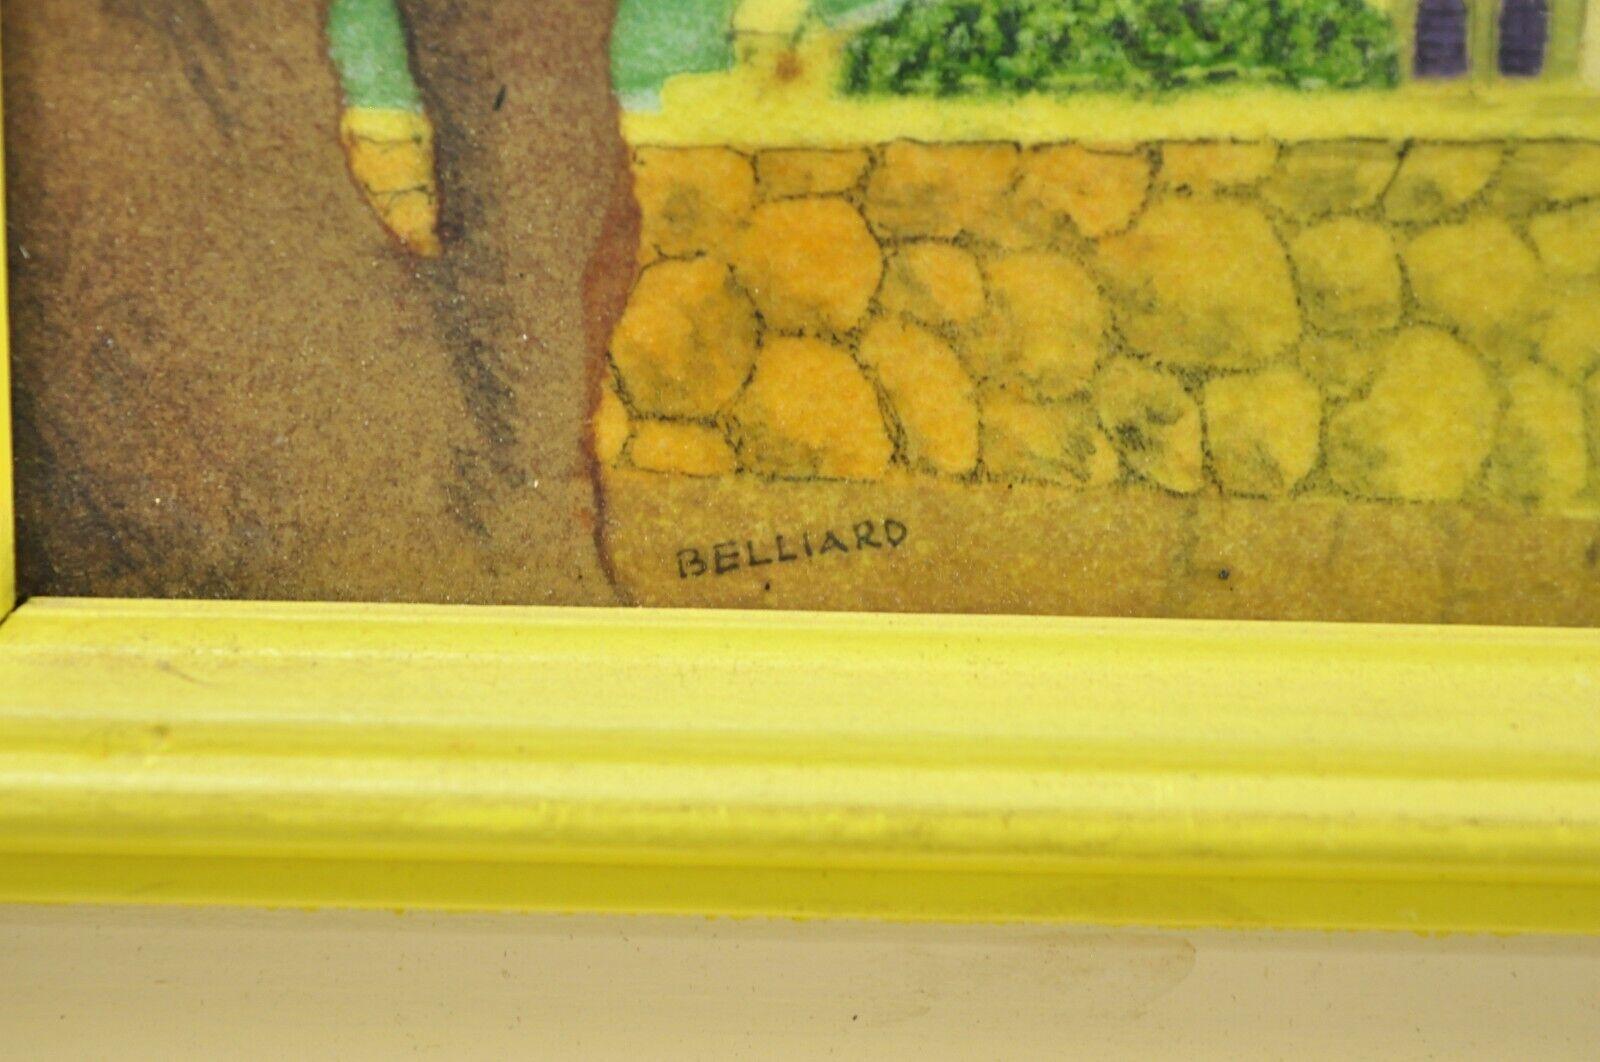 Daniel Belliard Enamel on Copper Small Framed Painting Yellow Countryside In Good Condition For Sale In Philadelphia, PA